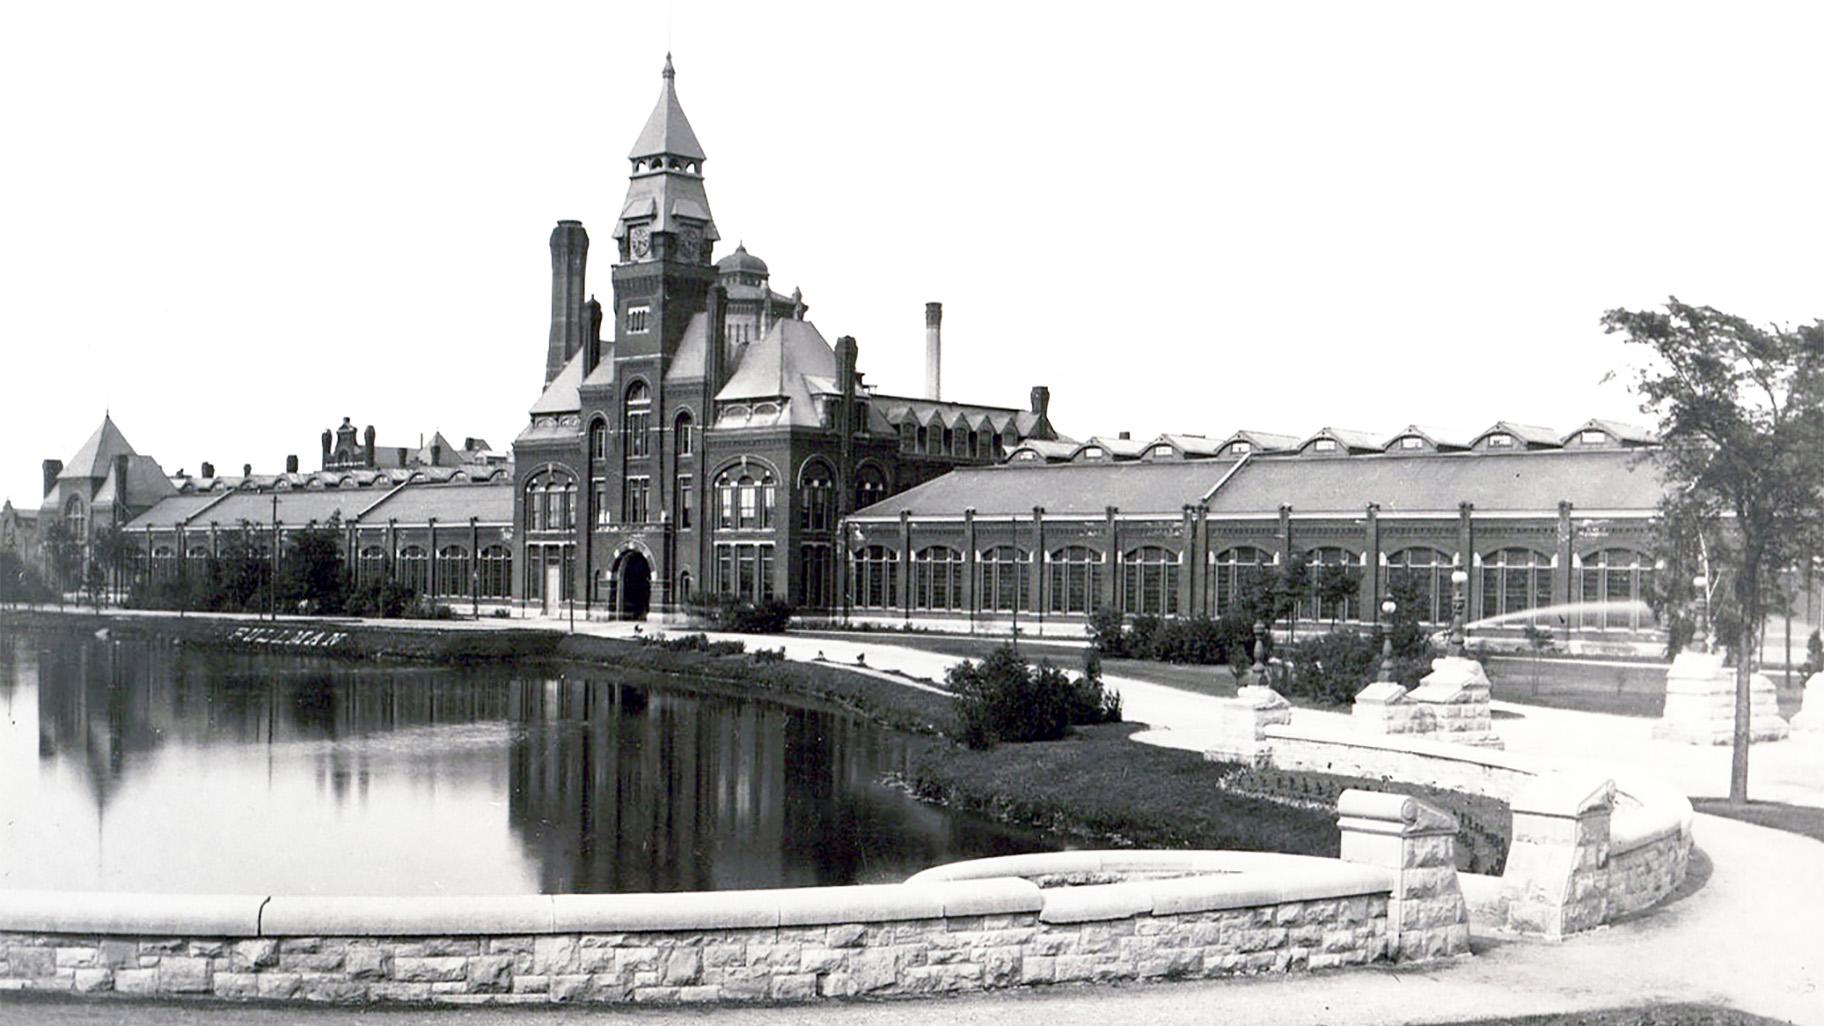 The clock tower administration building was the epicenter of the factory and company town, which is where the Pullman National Monument Visitor Center and Pullman State Historic Site Factory Grounds will open on Labor Day weekend. (Courtesy Pullman National Monument)